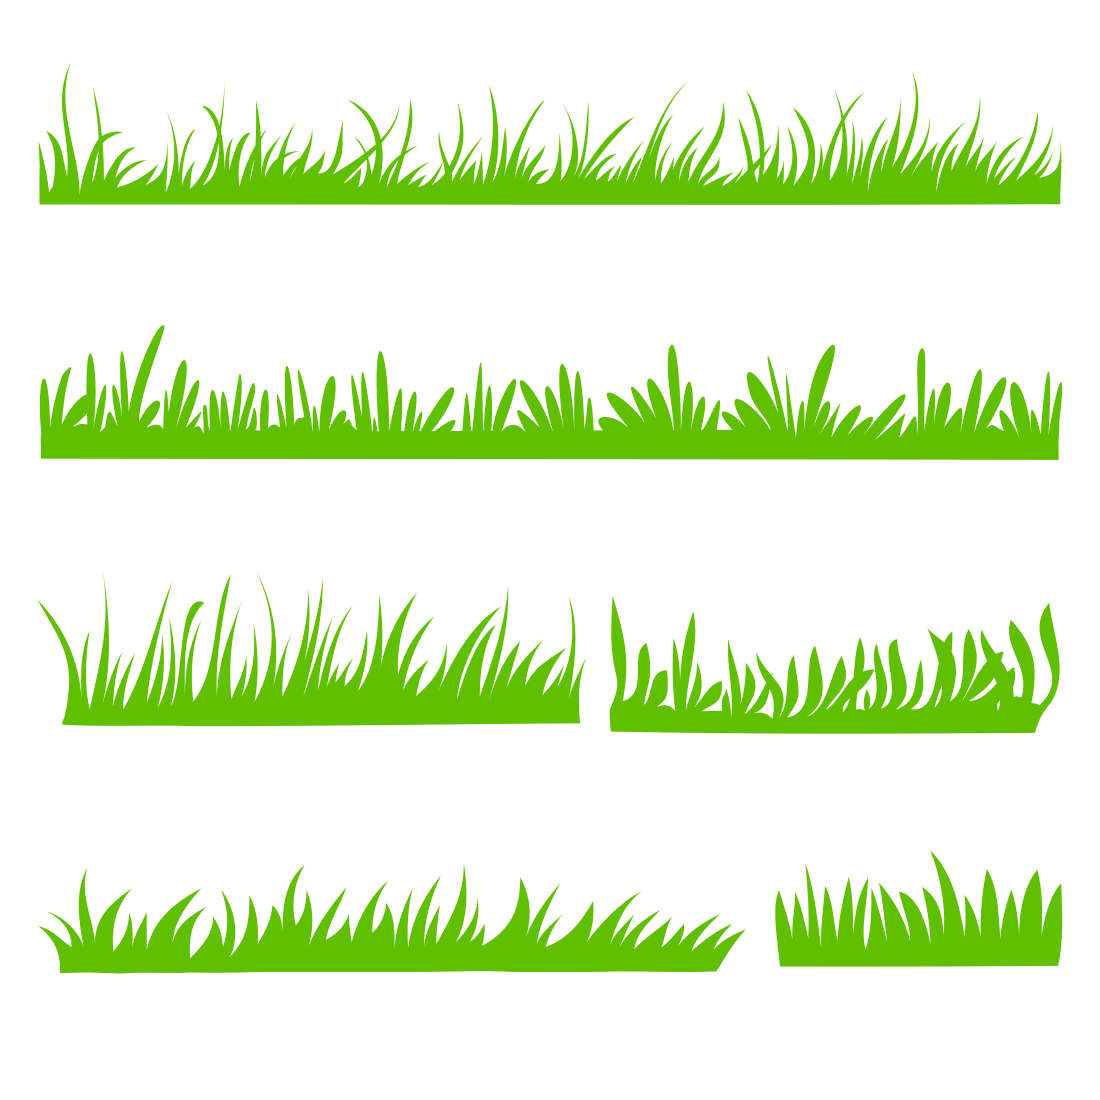 Green Grass Cartoon Style Illustration cover image.